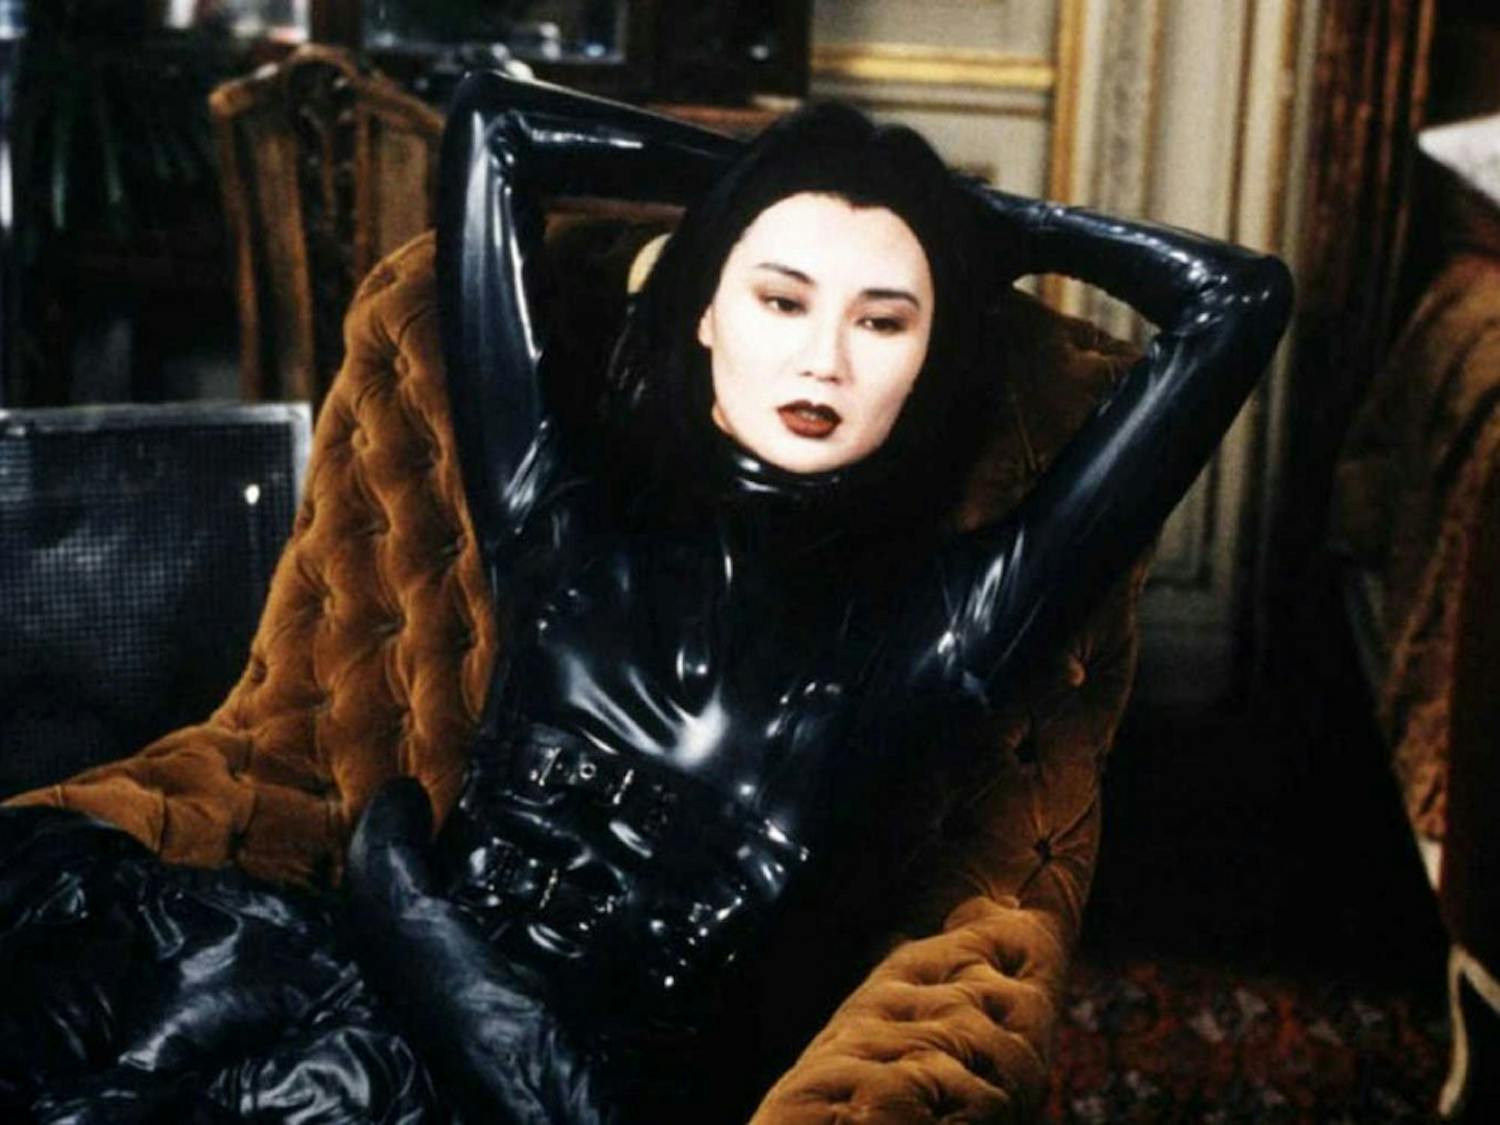 Screen/Society's Olivier Assayas retrospective will feature acclaimed films and lesser-known films by the French filmmaker, such as “Irma Vep” (above).